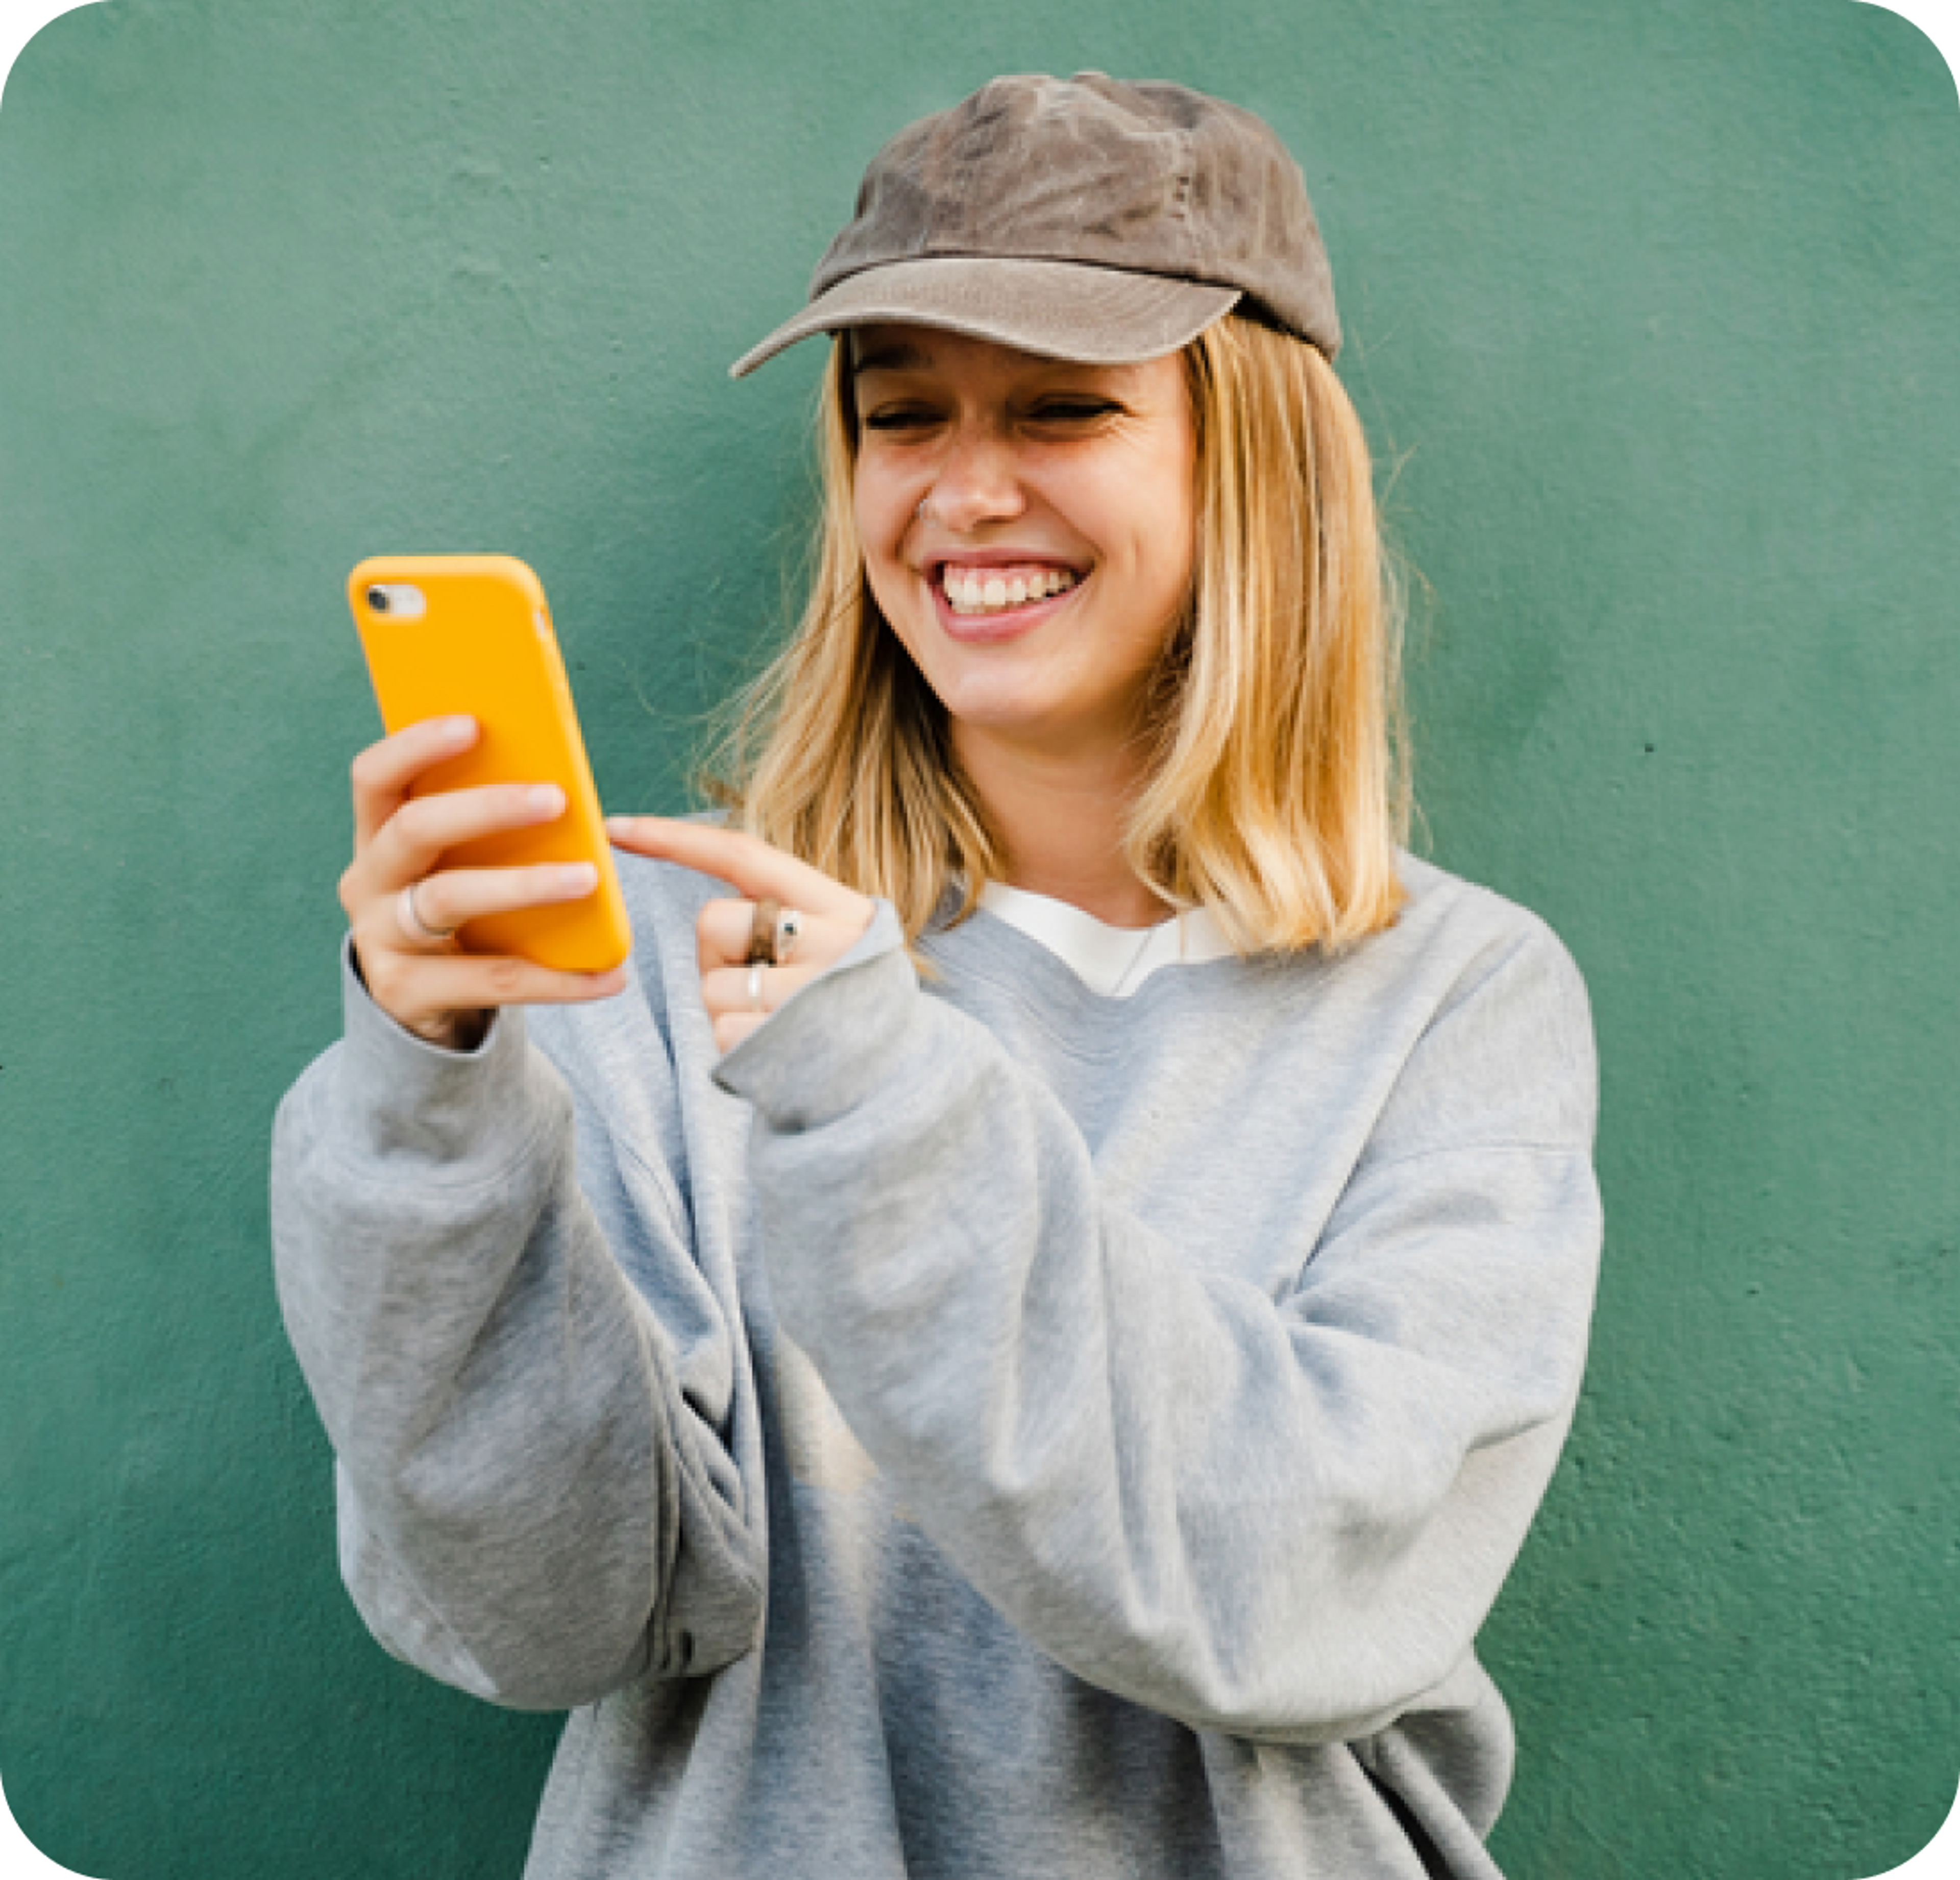 A photo of a woman smiling and looking at a phone